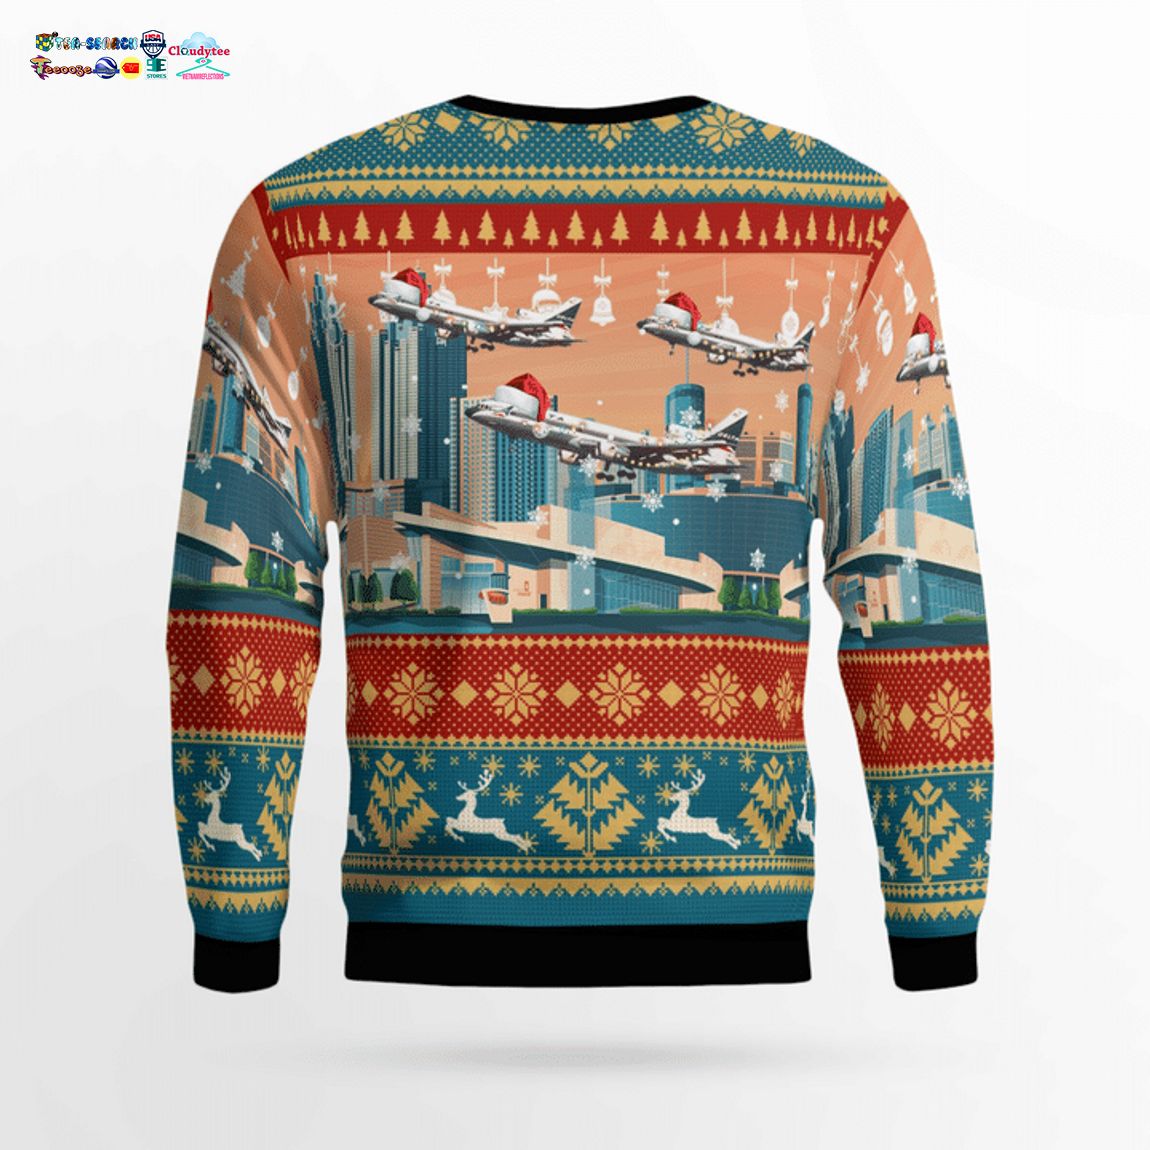 Delta Air Lines Lockheed L-1011-500 TriStar 3D Christmas Sweater